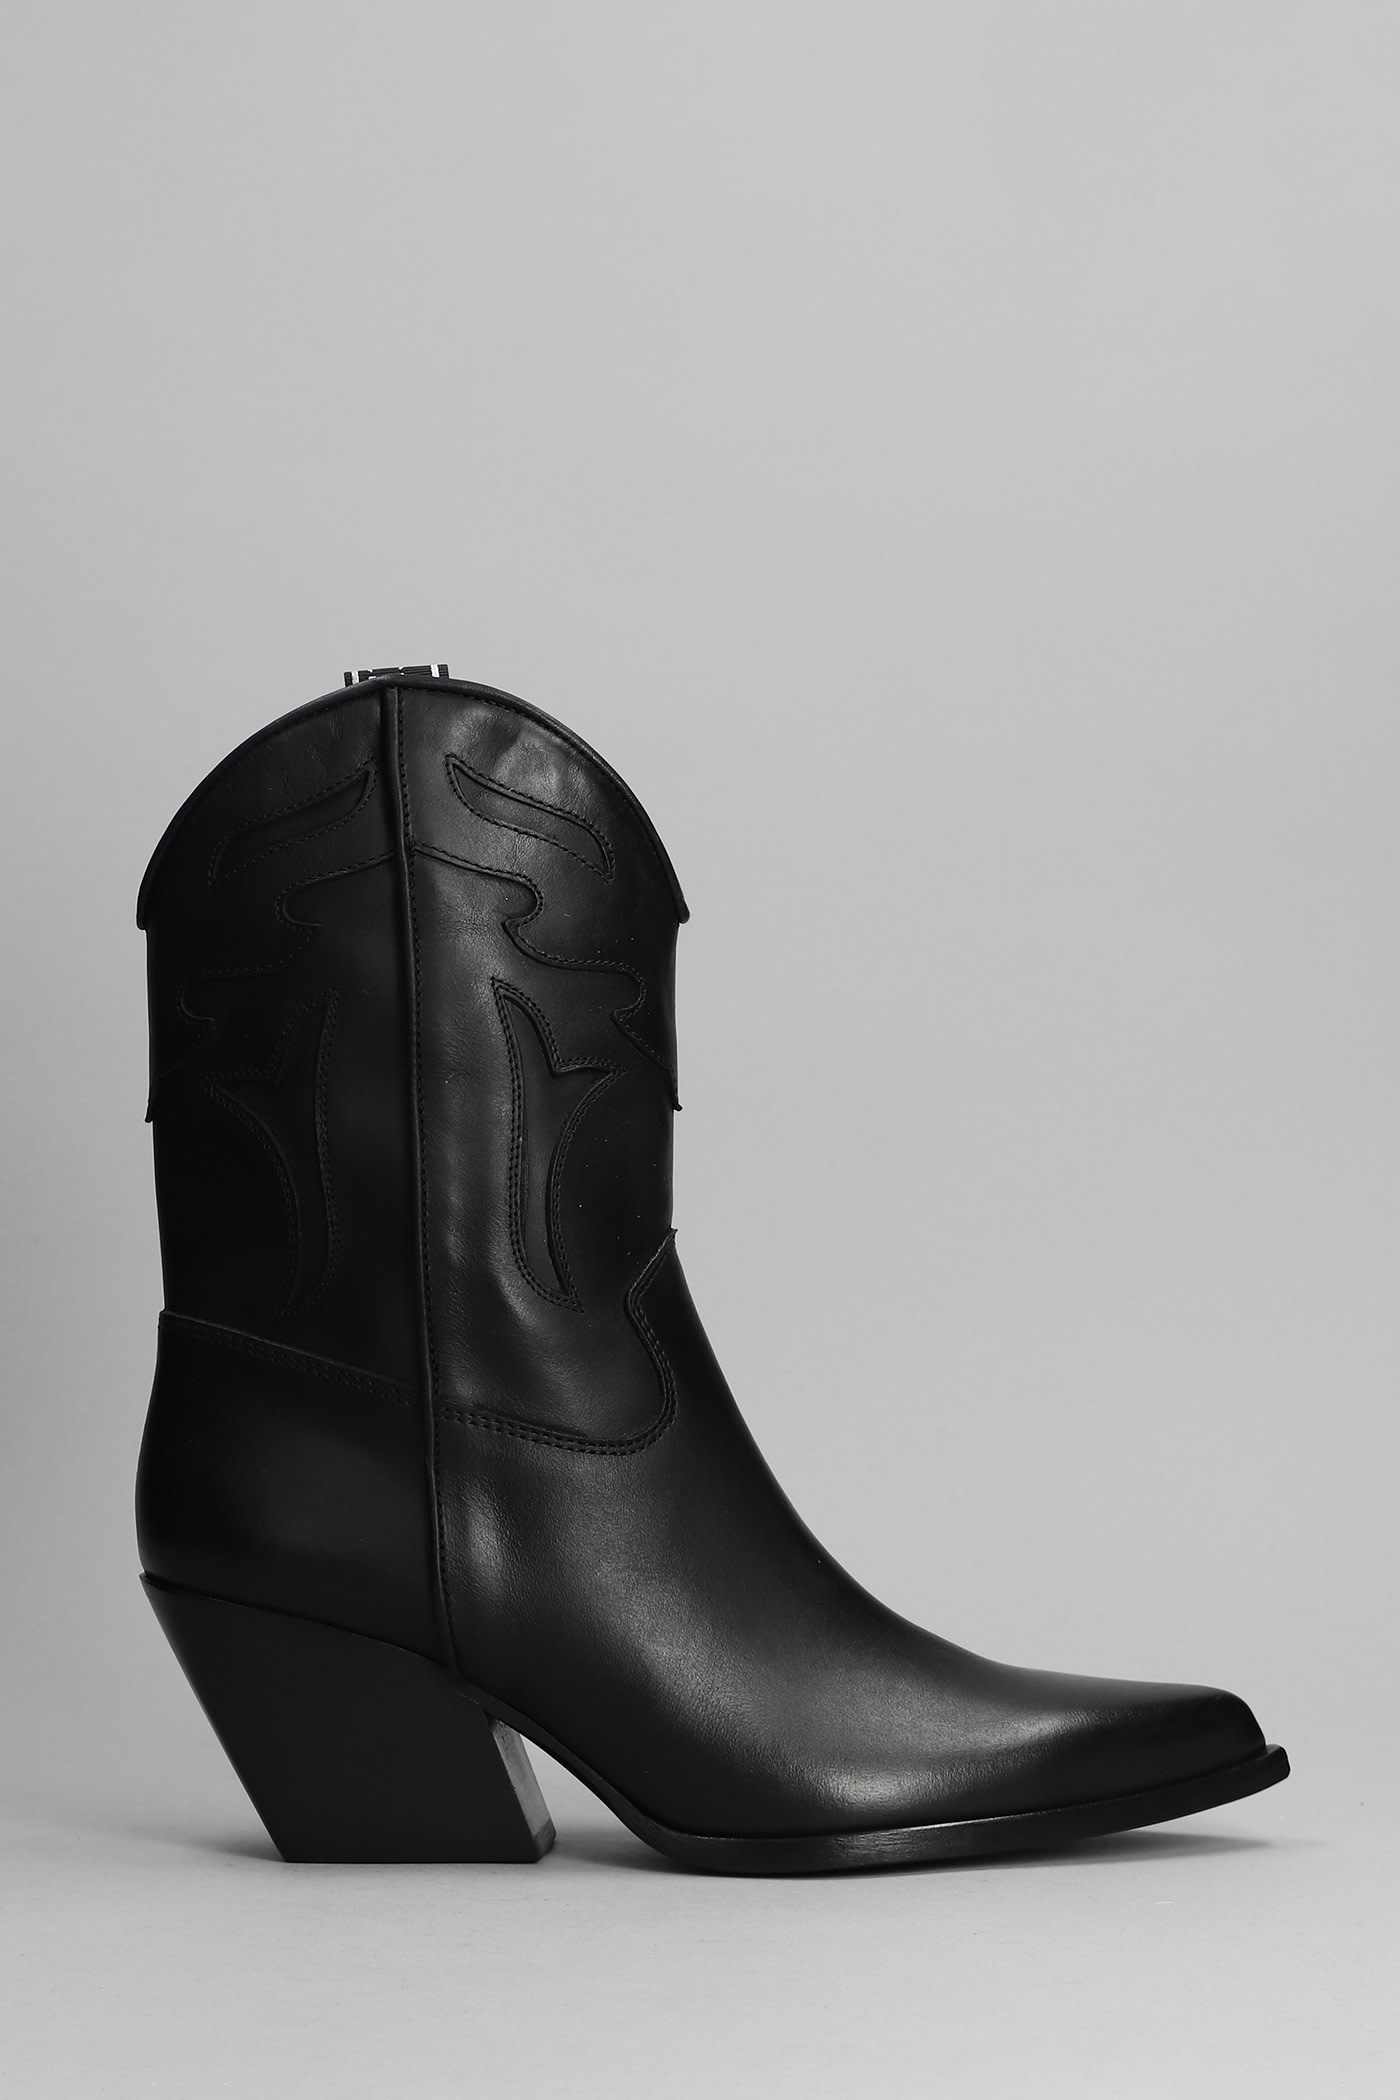 Elena Iachi Texan Ankle Boots In Black Leather